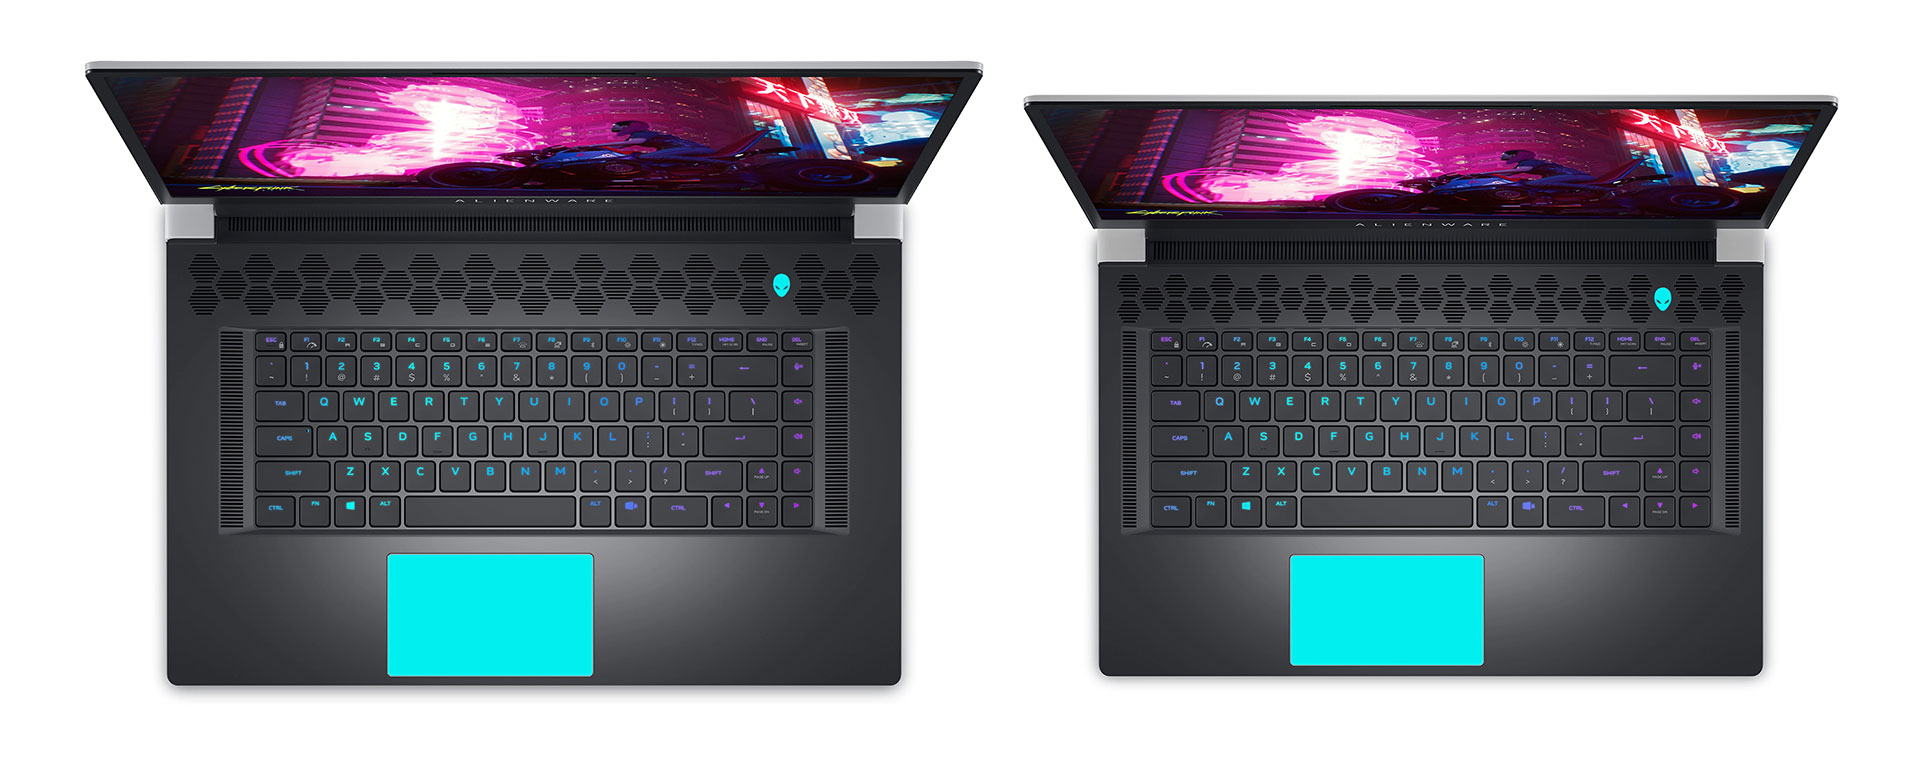 Alienware X15 and X17 - keyboard and RGB clickpads